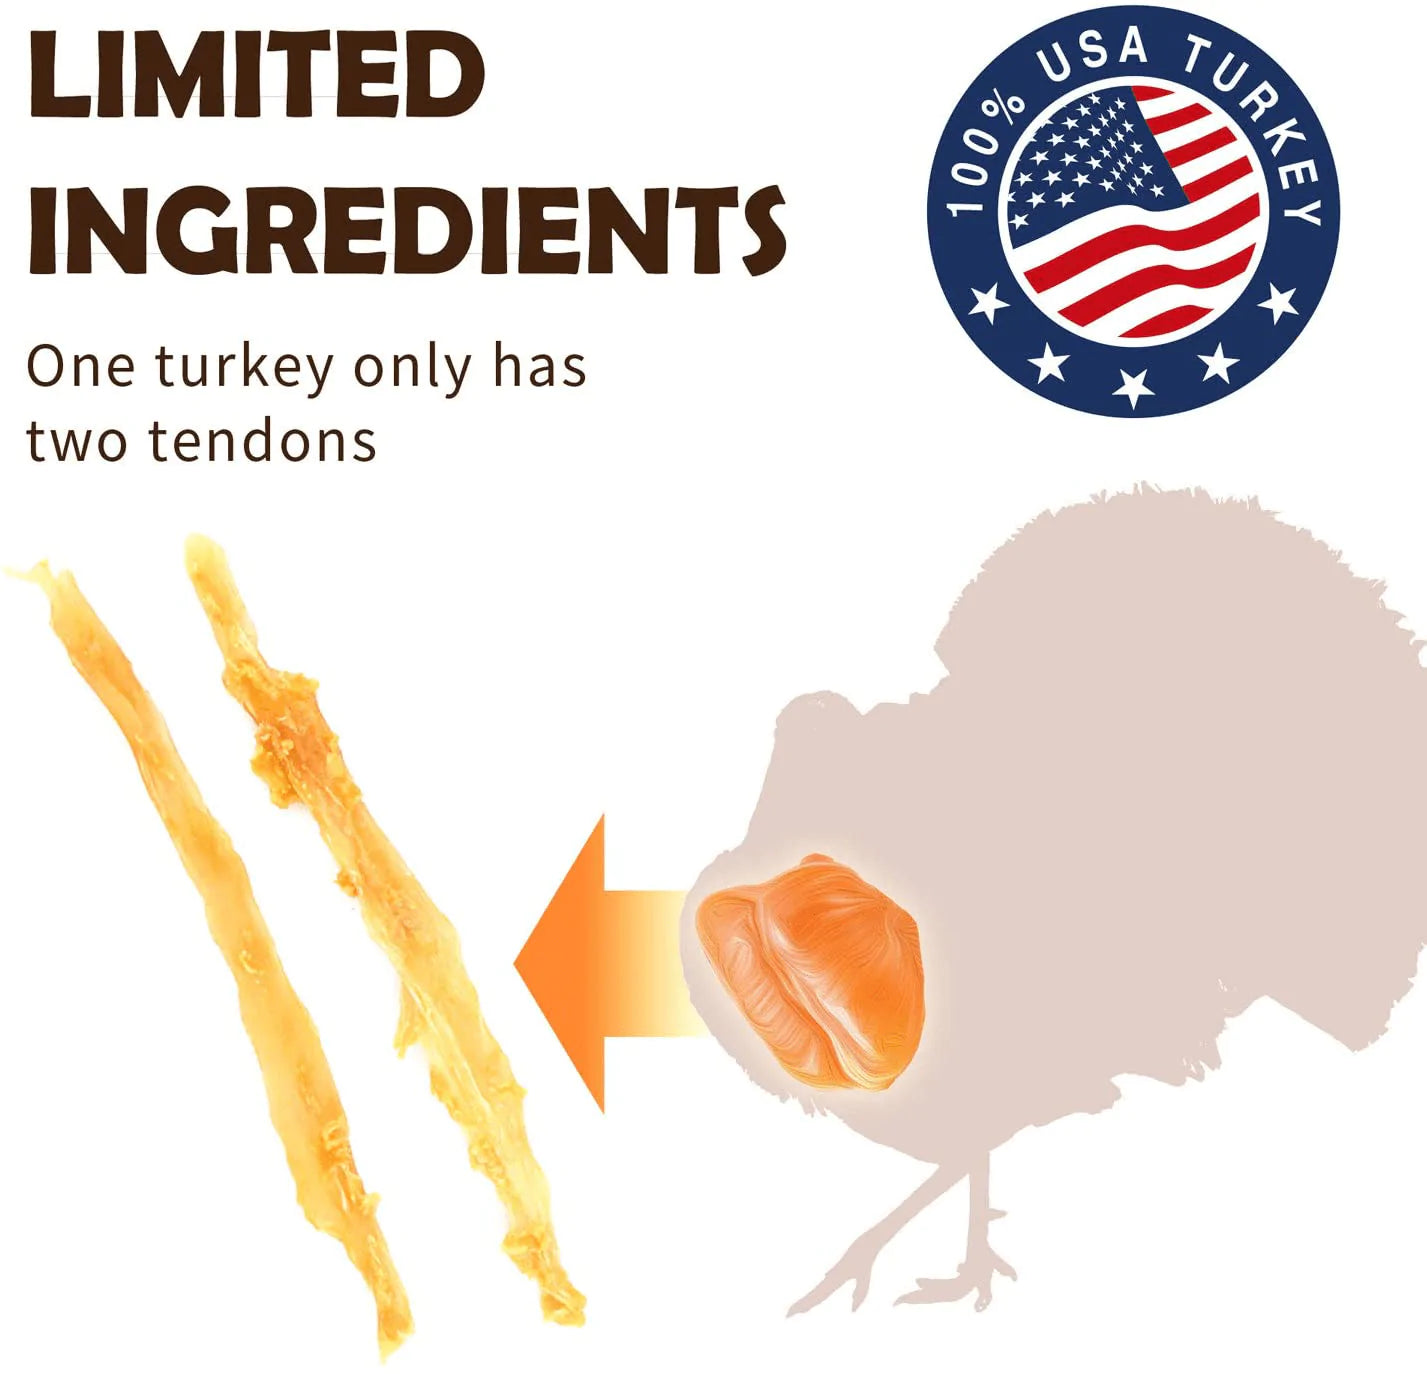 Afreschi Turkey Tendon for Dogs, Premium All-Natural, Hypoallergenic, Dog Chew Treat, Easy to Digest, Alternative to Rawhide, Ingredient Sourced from USA, (Small) Animals & Pet Supplies > Pet Supplies > Dog Supplies > Dog Treats A Freschi srl   